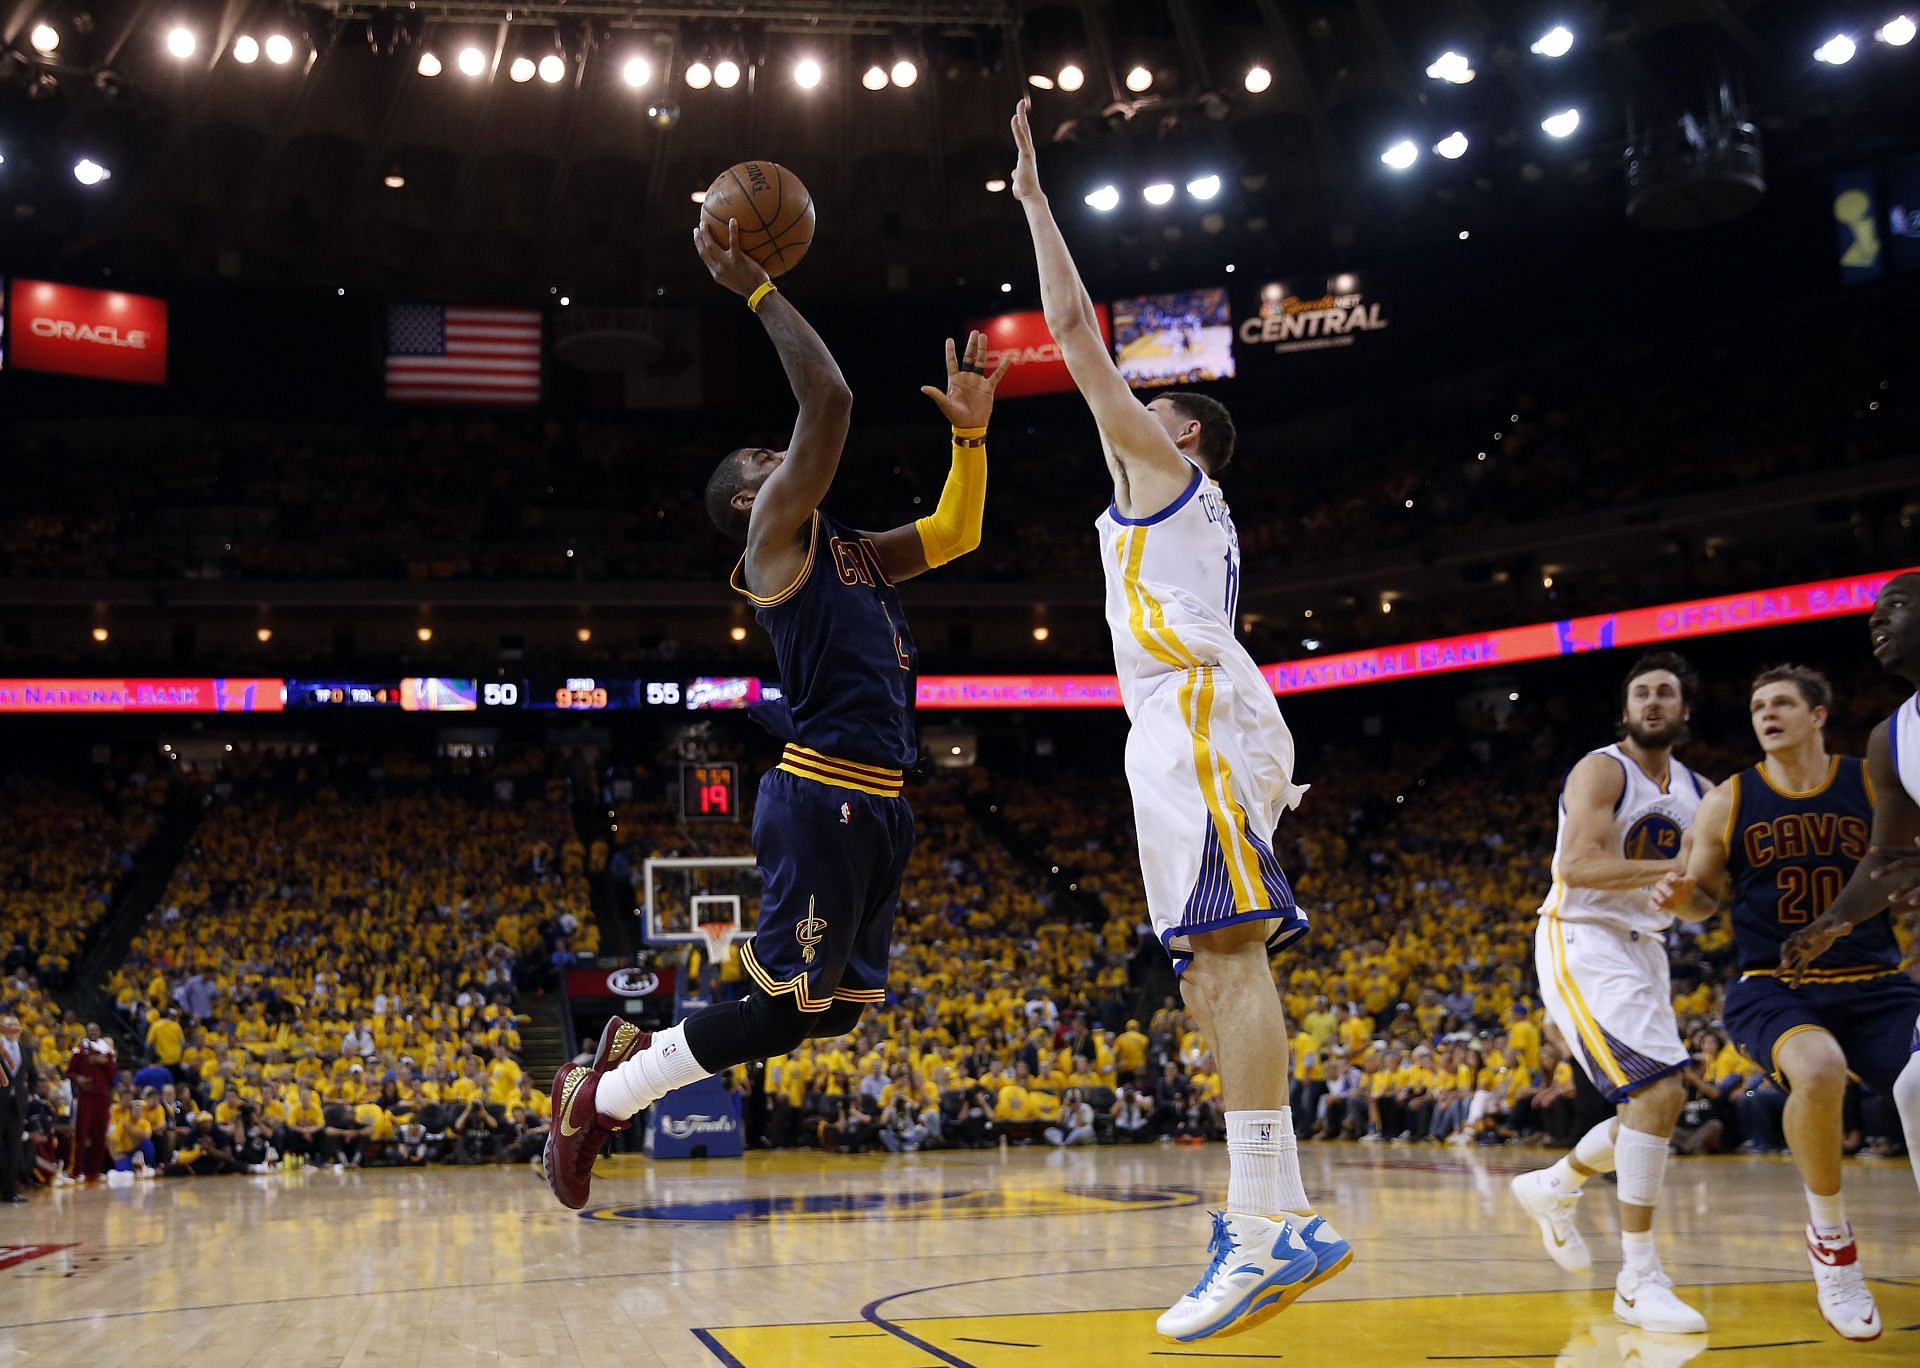 Kyrie Irving (#2) of the Cleveland Cavaliers goes up against Klay Thompson (#11) of the Golden State Warriors